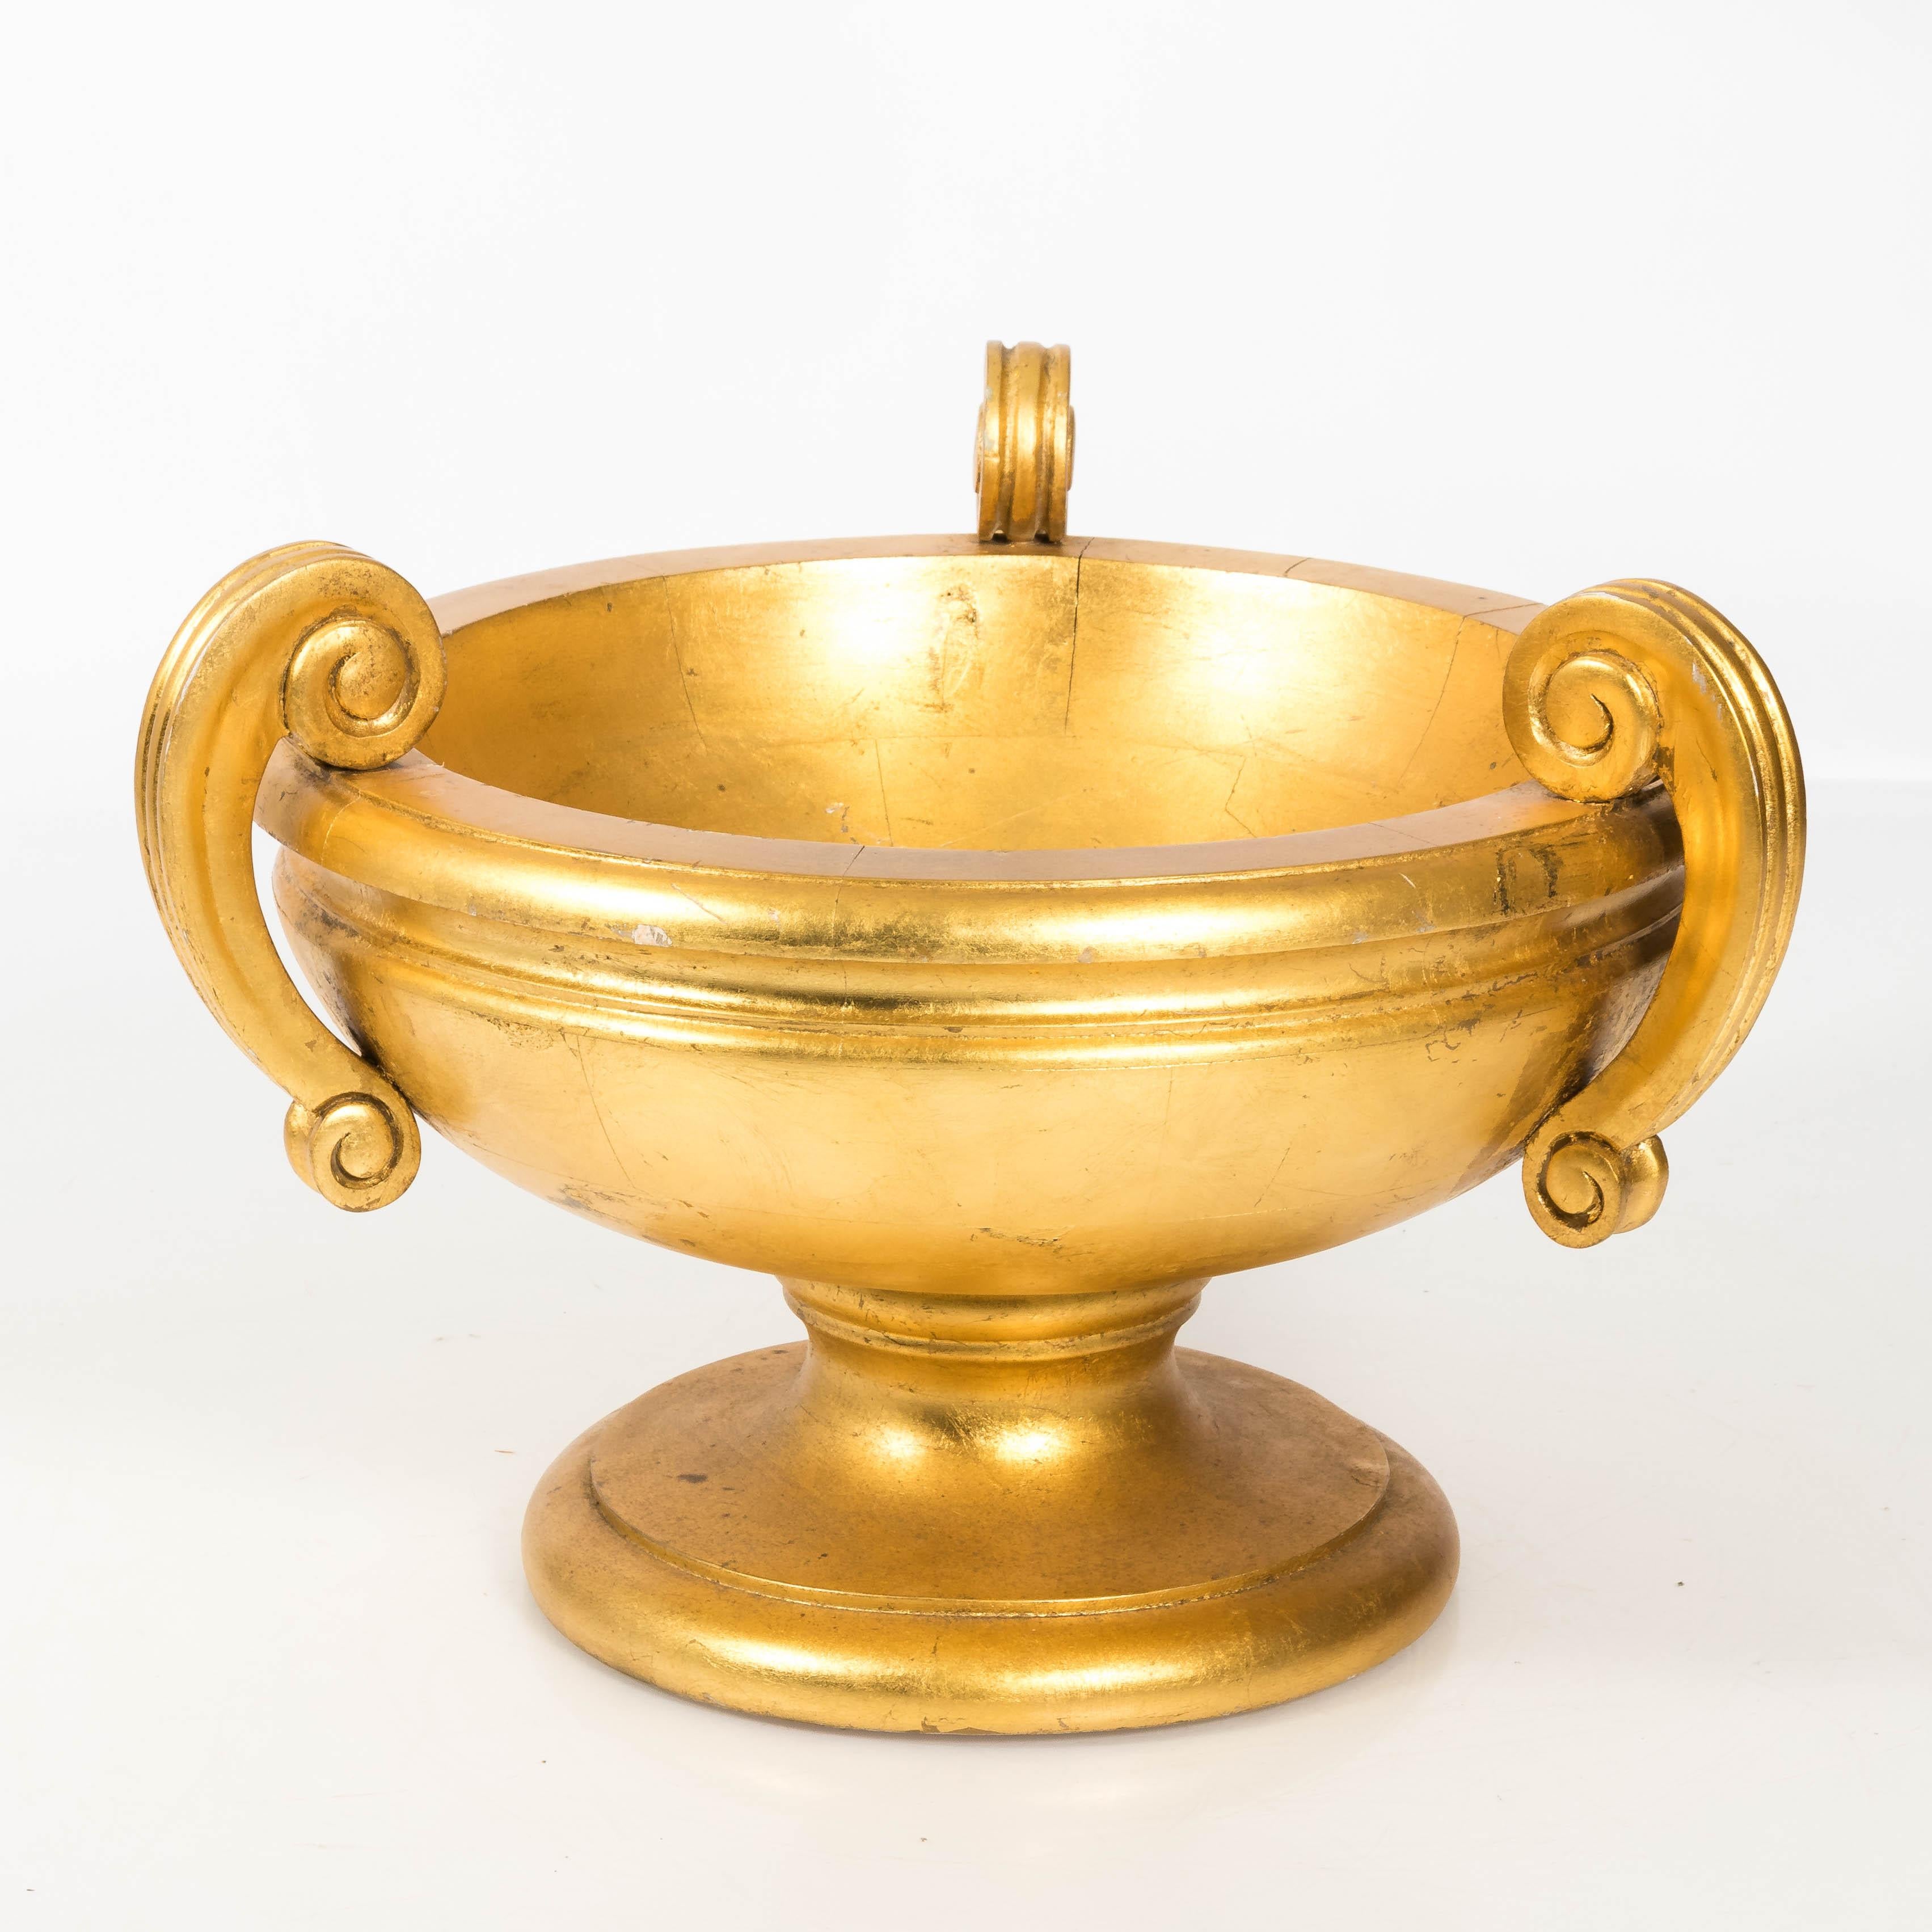 Neoclassical Revival Neoclassical Style Gilt Wooden Bowl For Sale